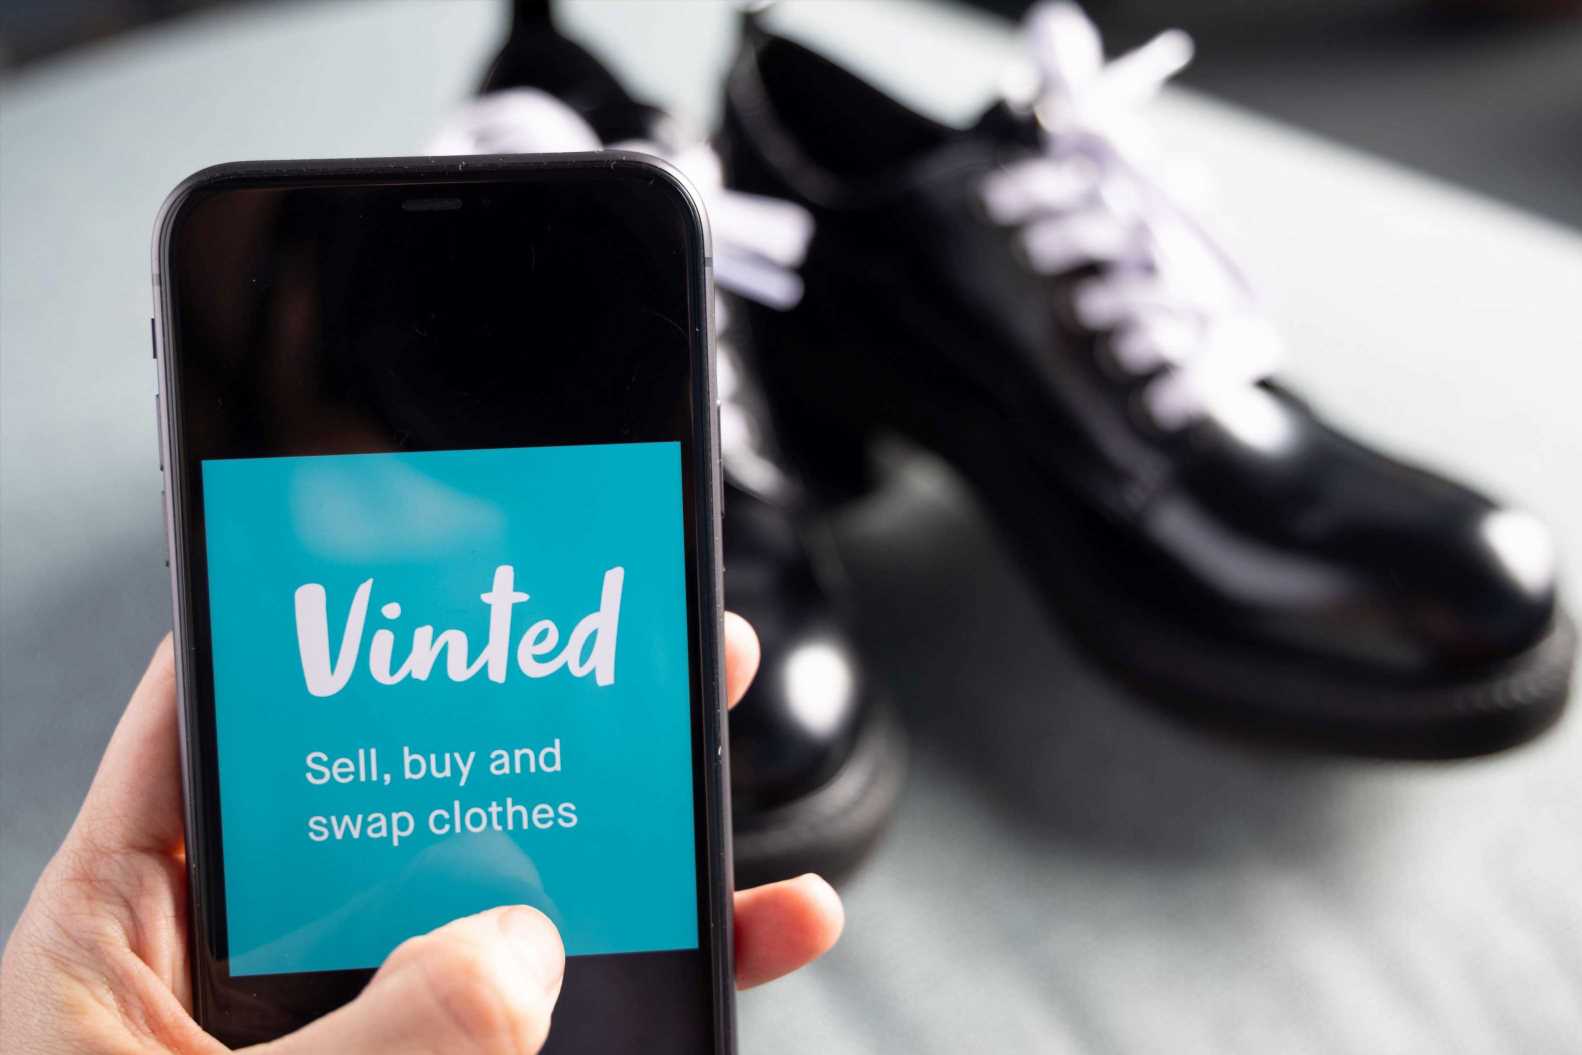 Huge change coming in weeks for anyone selling on Vinted or Depop amid tax shake up – check if you're affected | The Sun